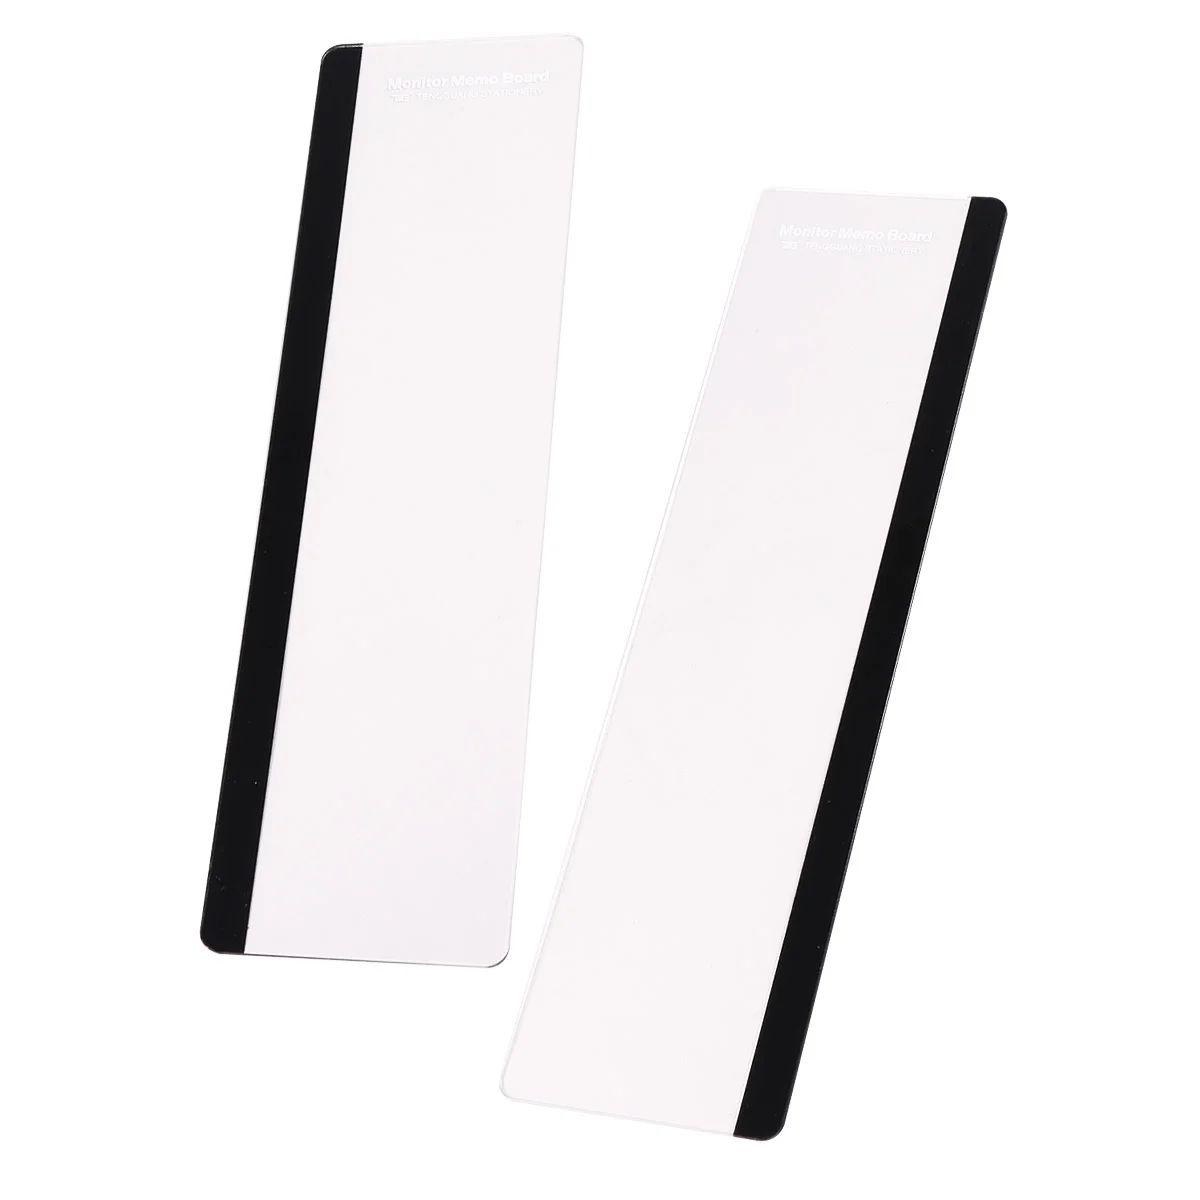 

2 Pcs Monitors Side Panel Sticky Reminder for Computer Memo Board Screen Note Holder